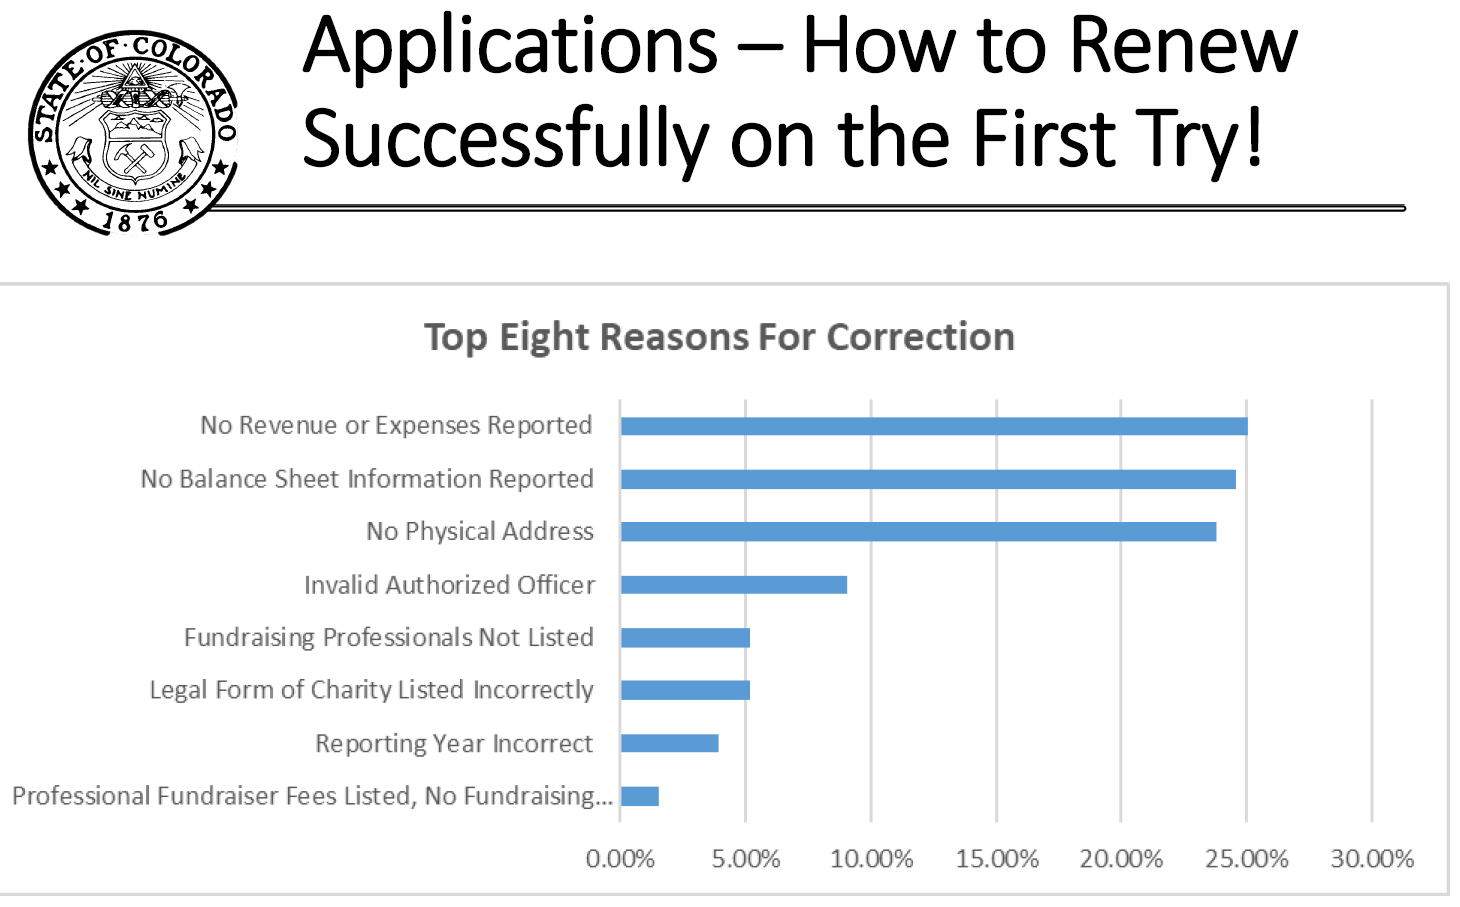 Renewing your registration - Tips for success (PDF)